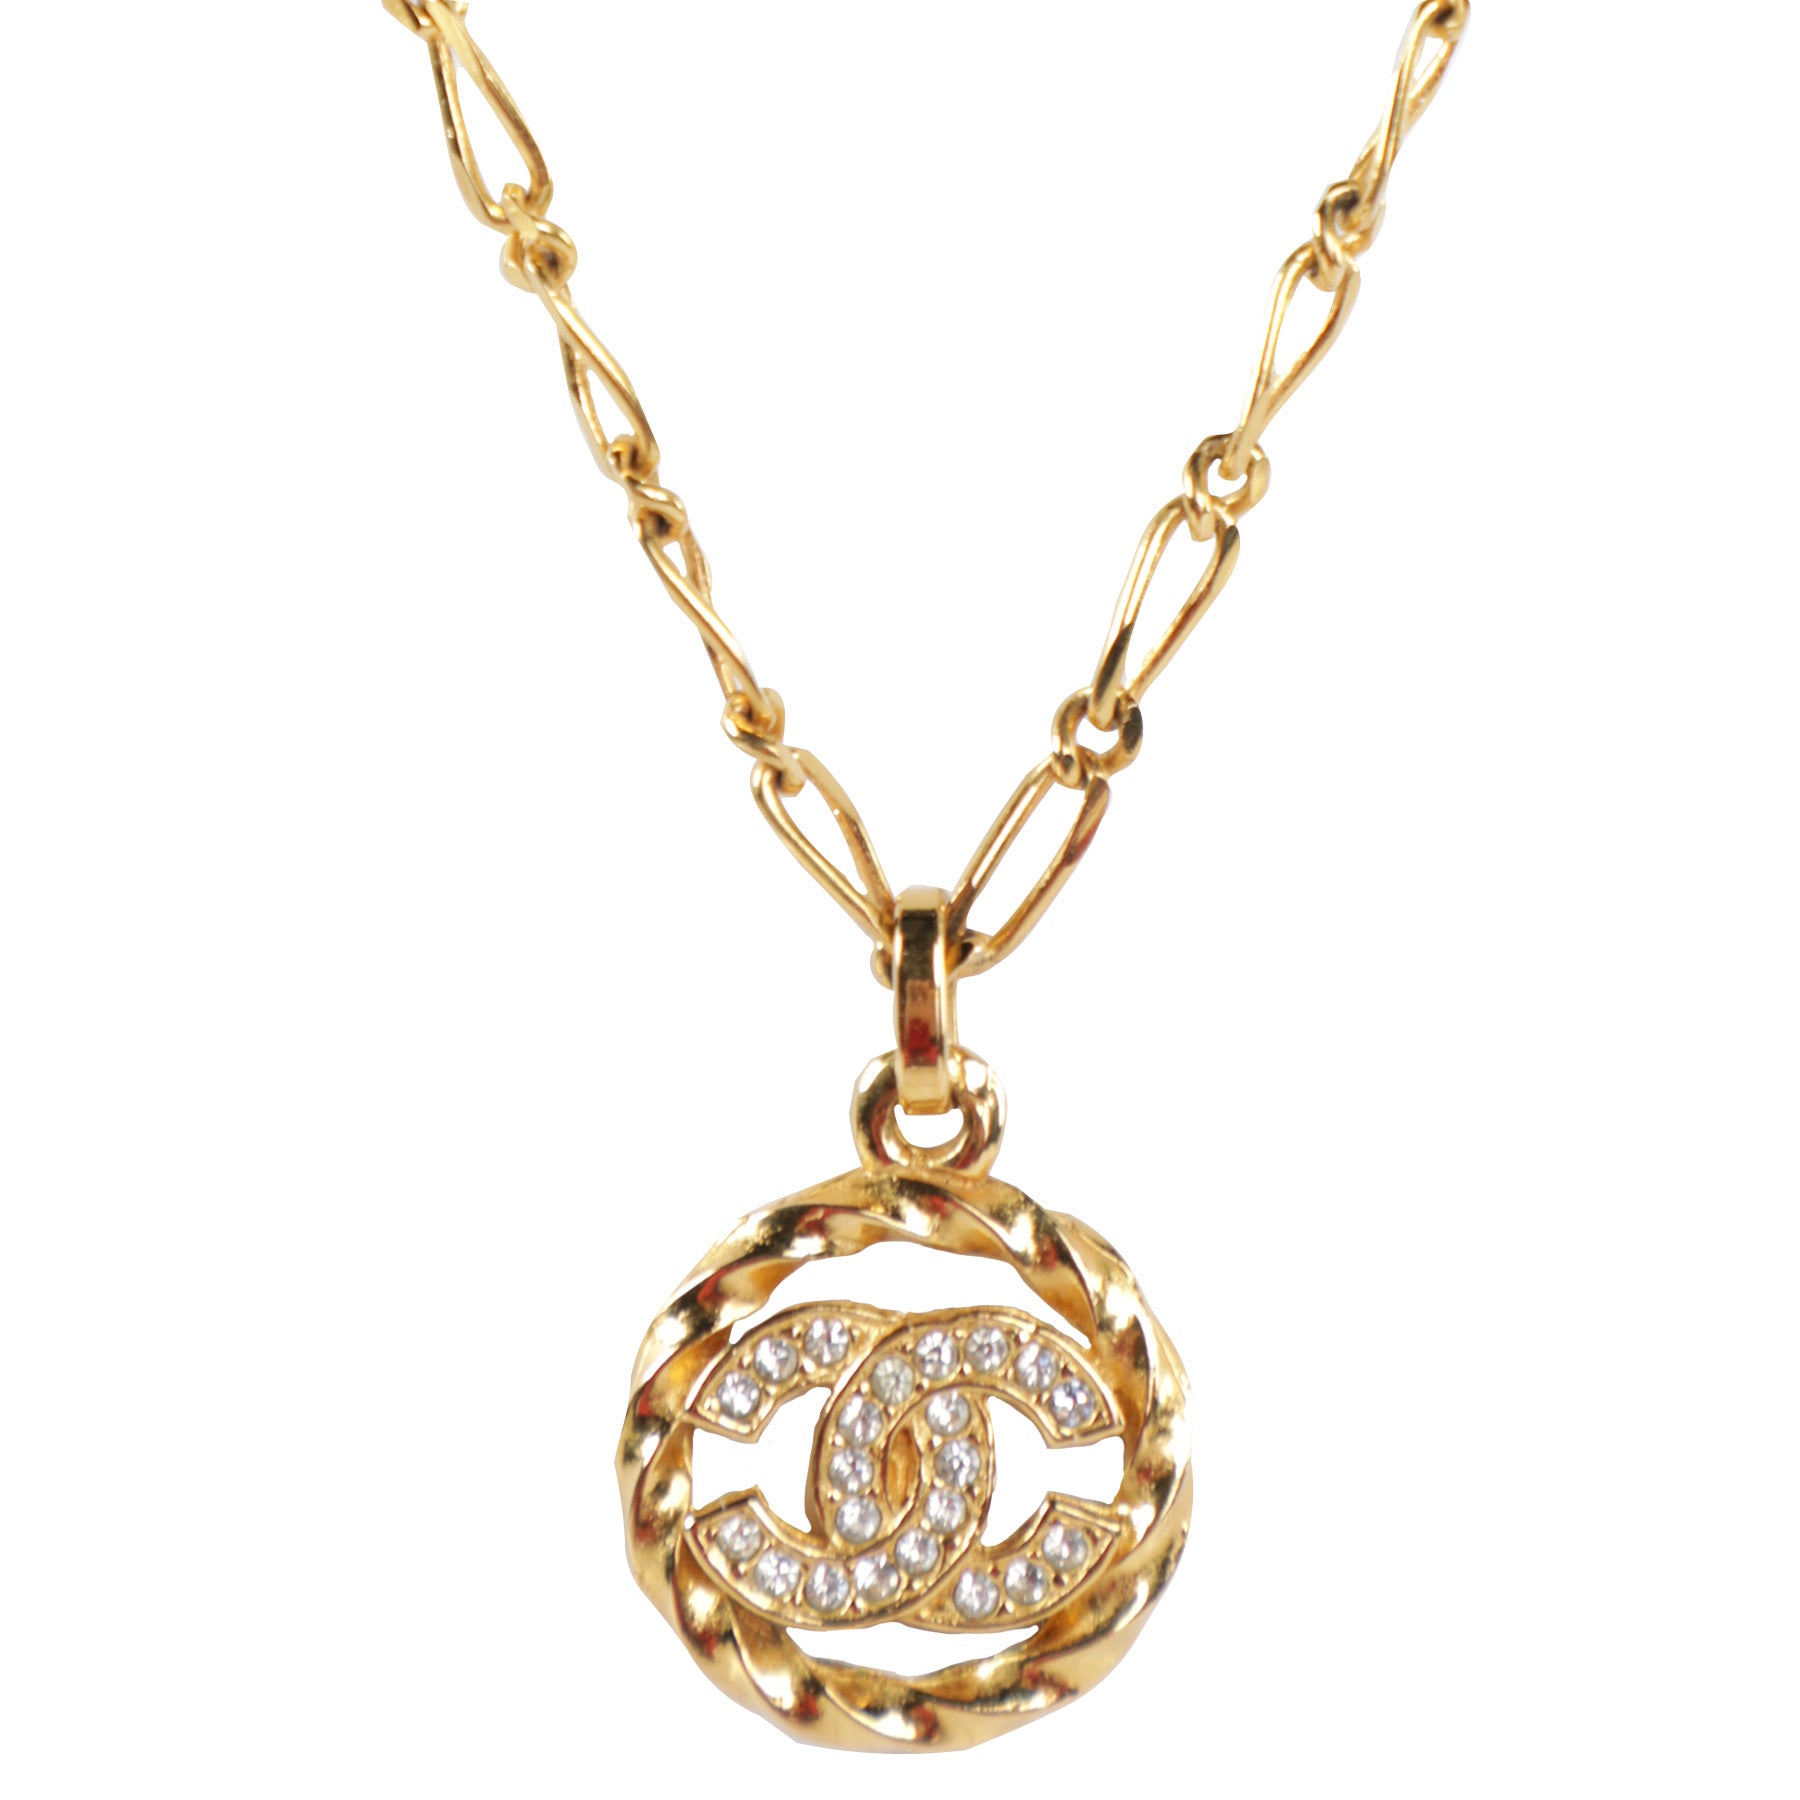 Authentic vintage Chanel necklace turnlock CC logo pendant gold chain